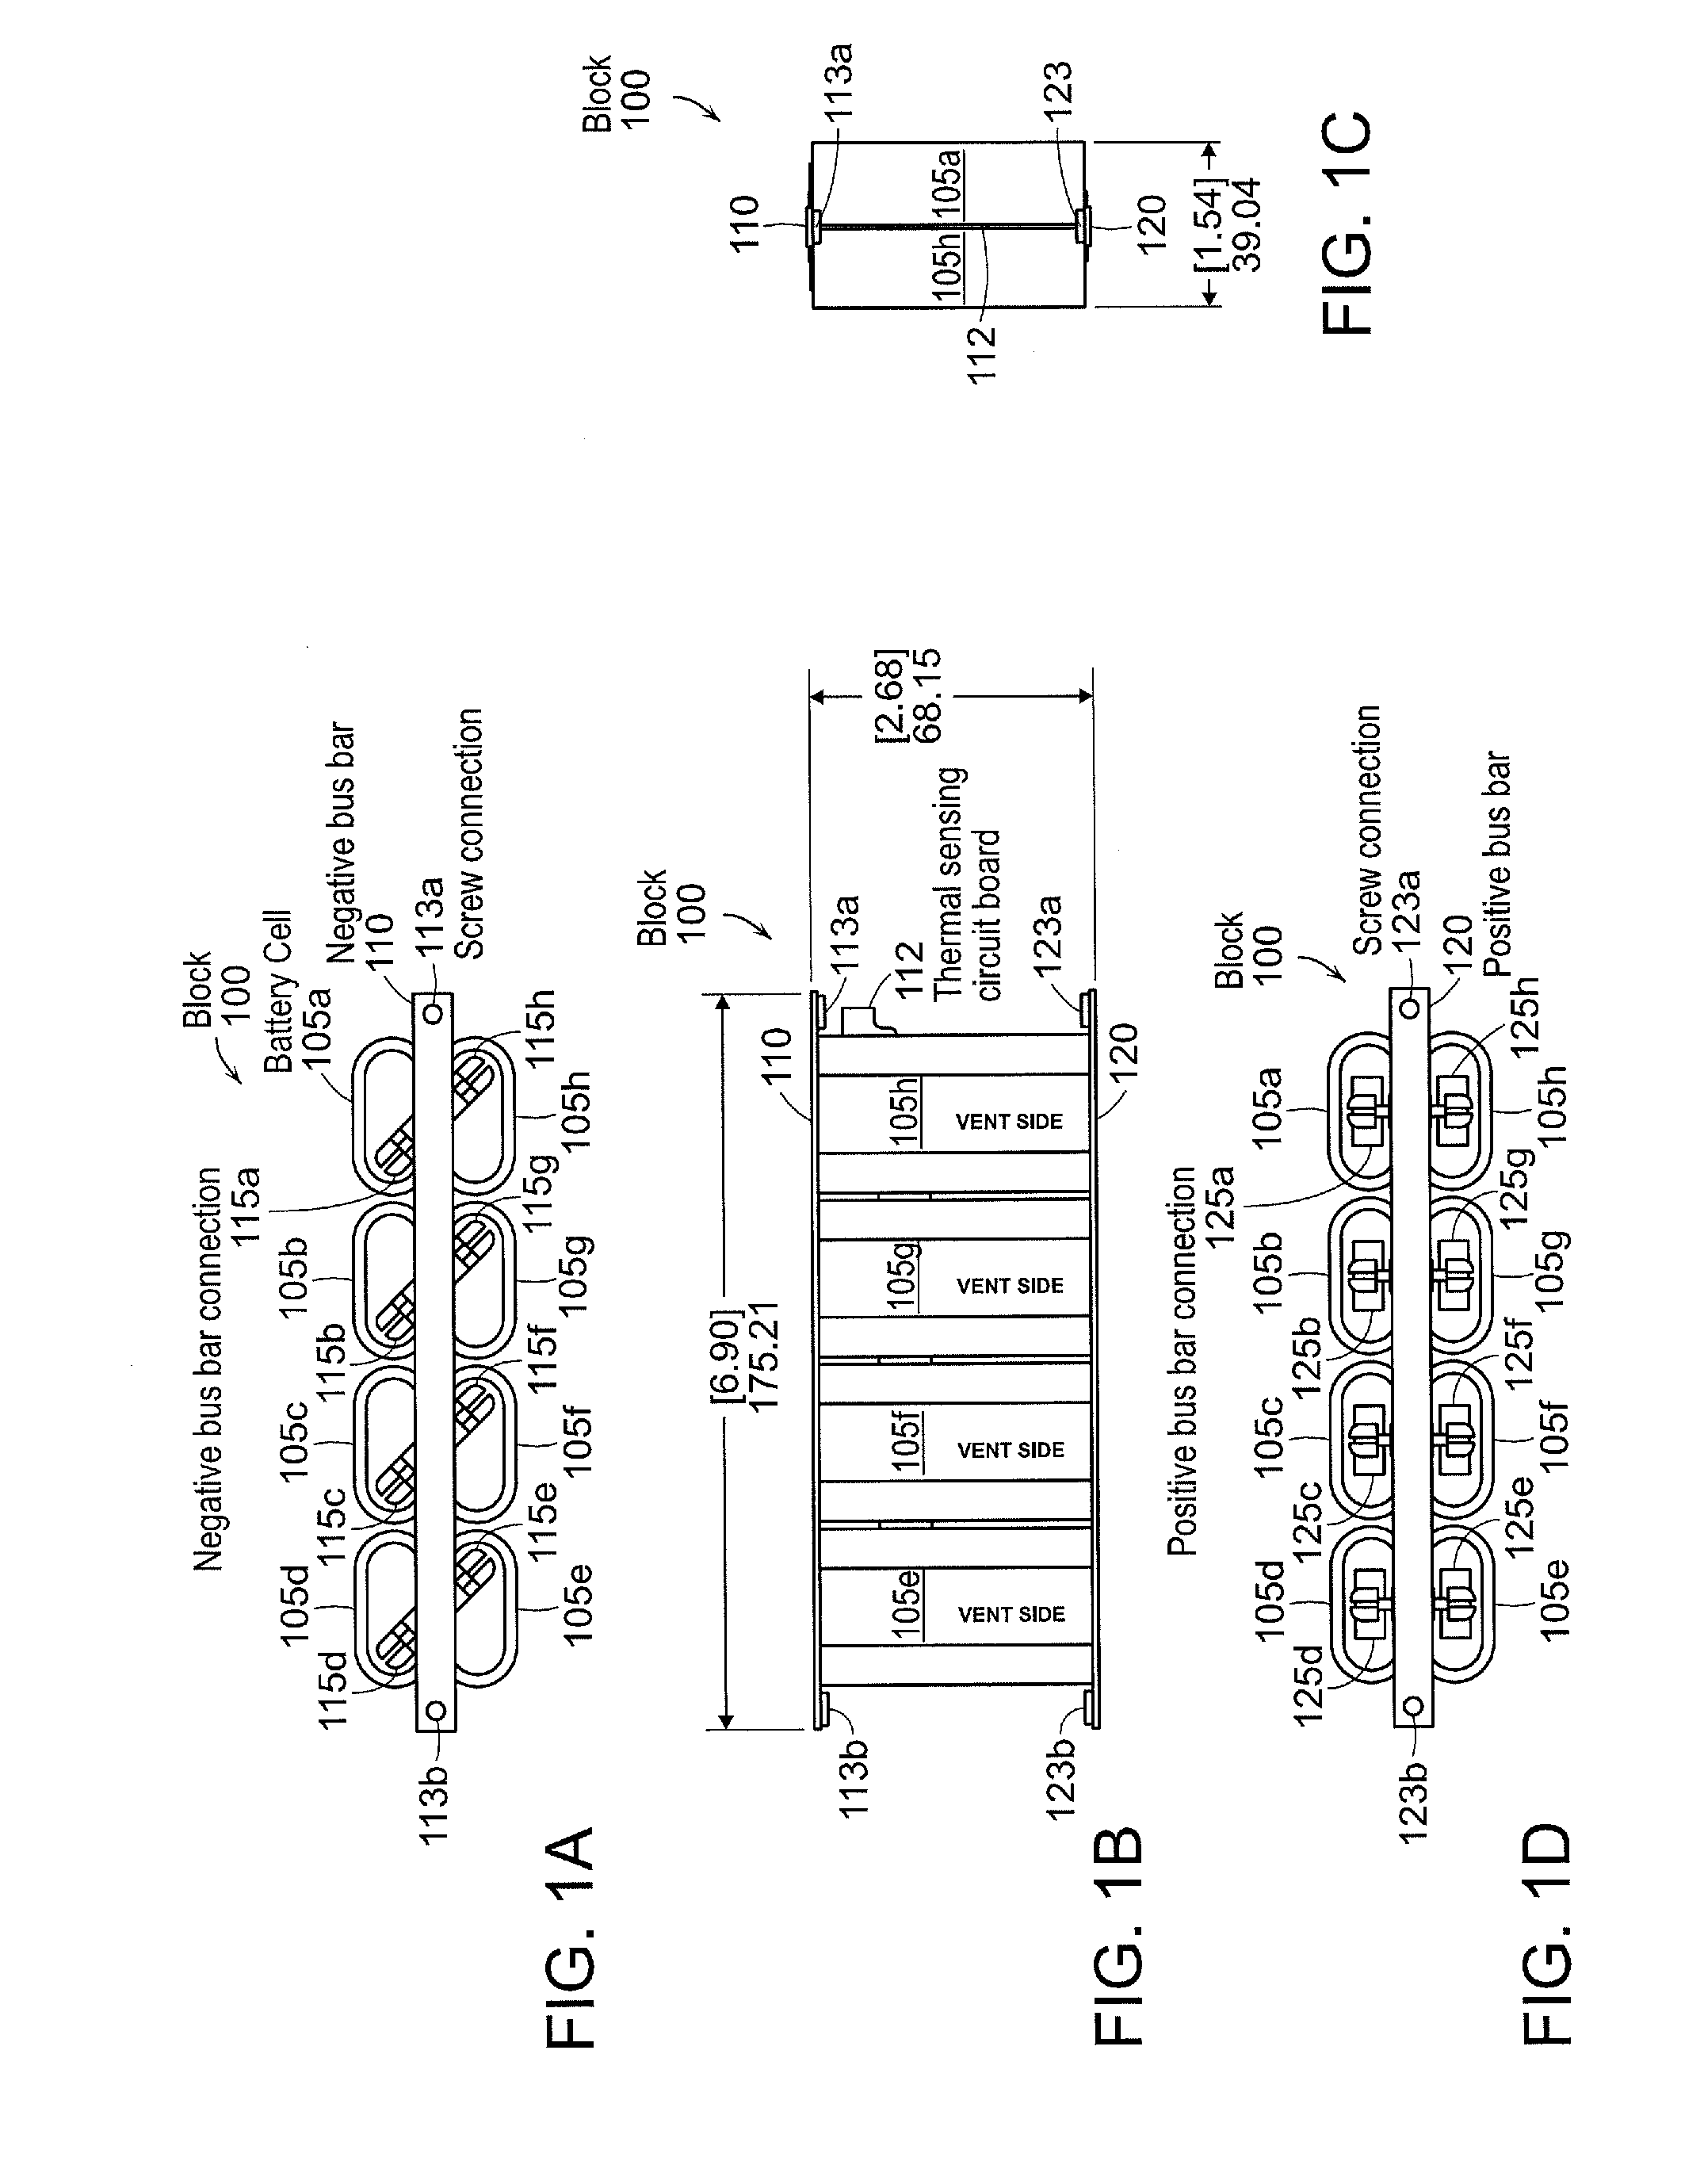 Large scale battery systems and method of assembly